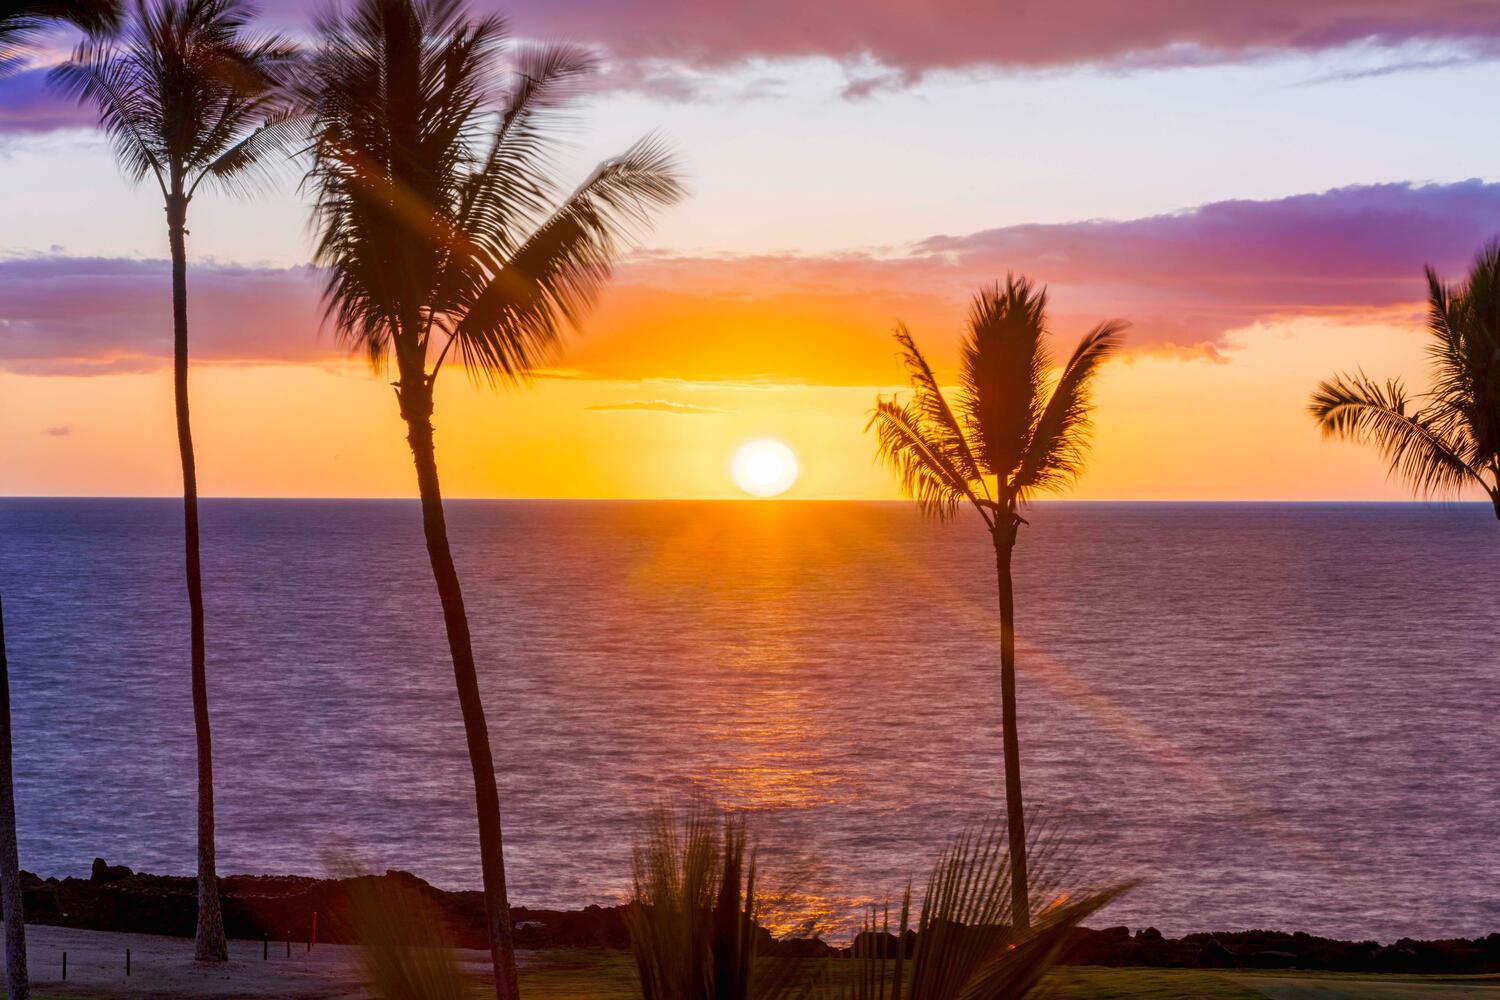 Kailua-Kona Vacation Rentals, Holua Kai #26 - Captivating sunset view framed by swaying palm trees over the ocean, creating a picture-perfect end to the day